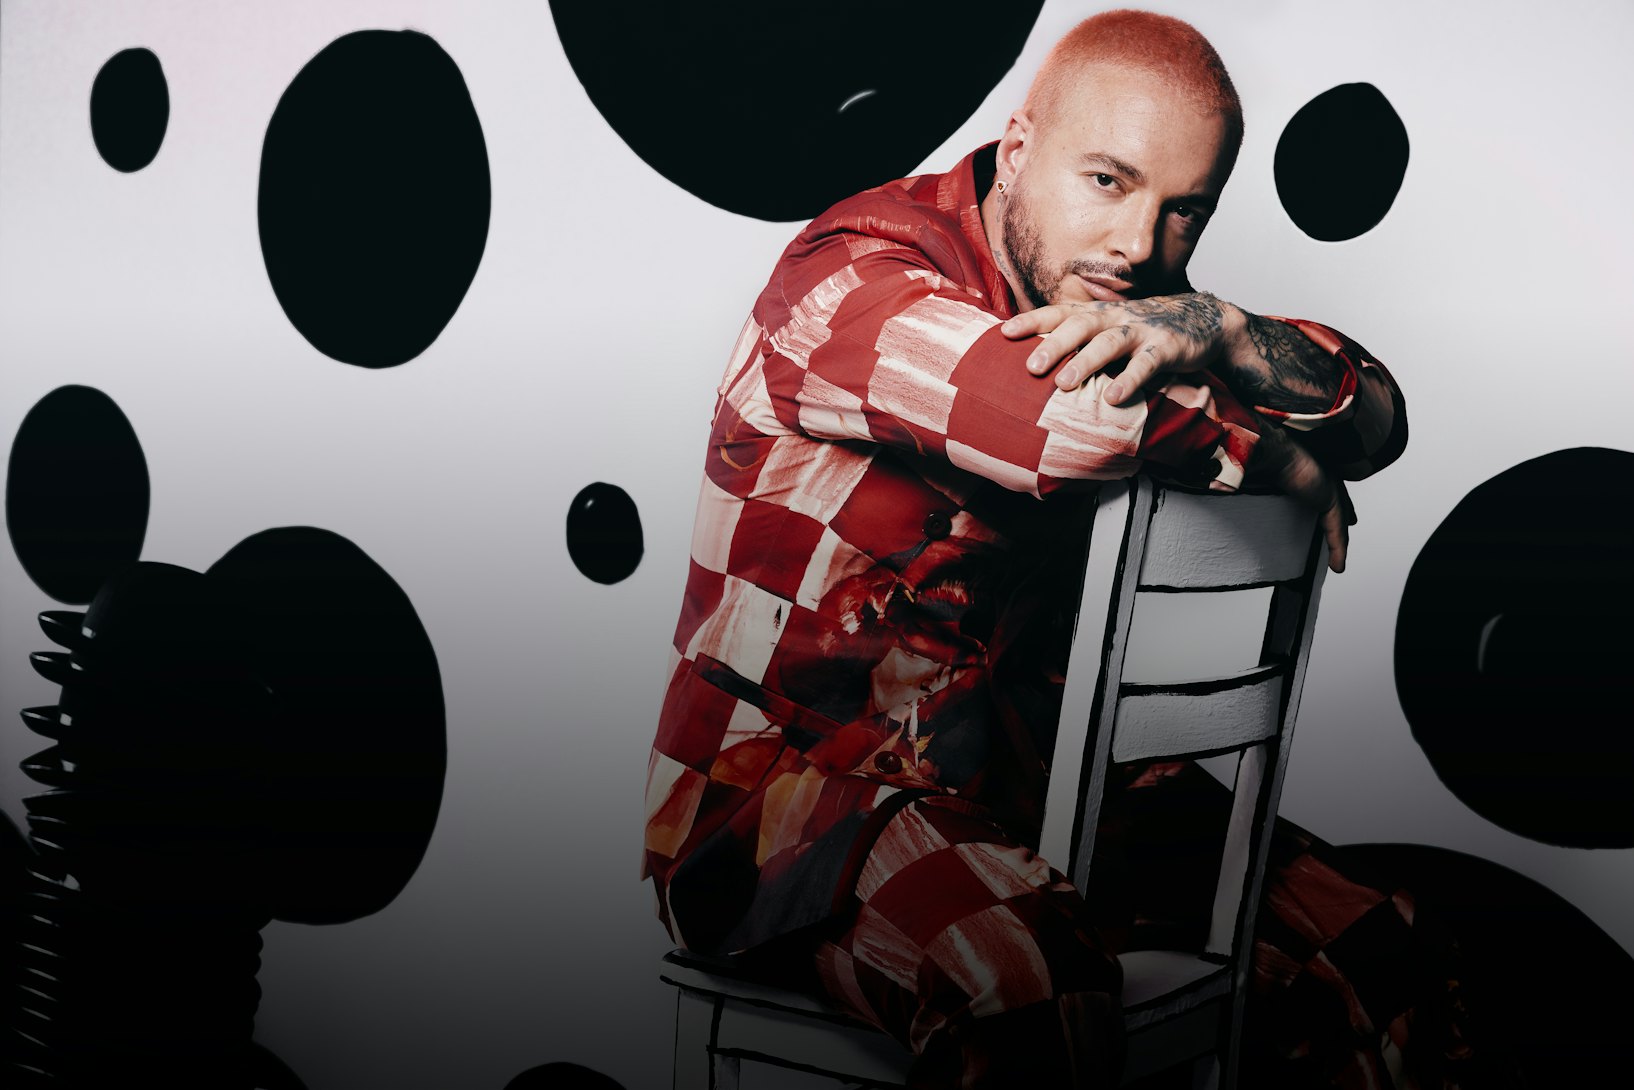 J Balvin Discusses New Album, Jay-Z, And More In New Interview